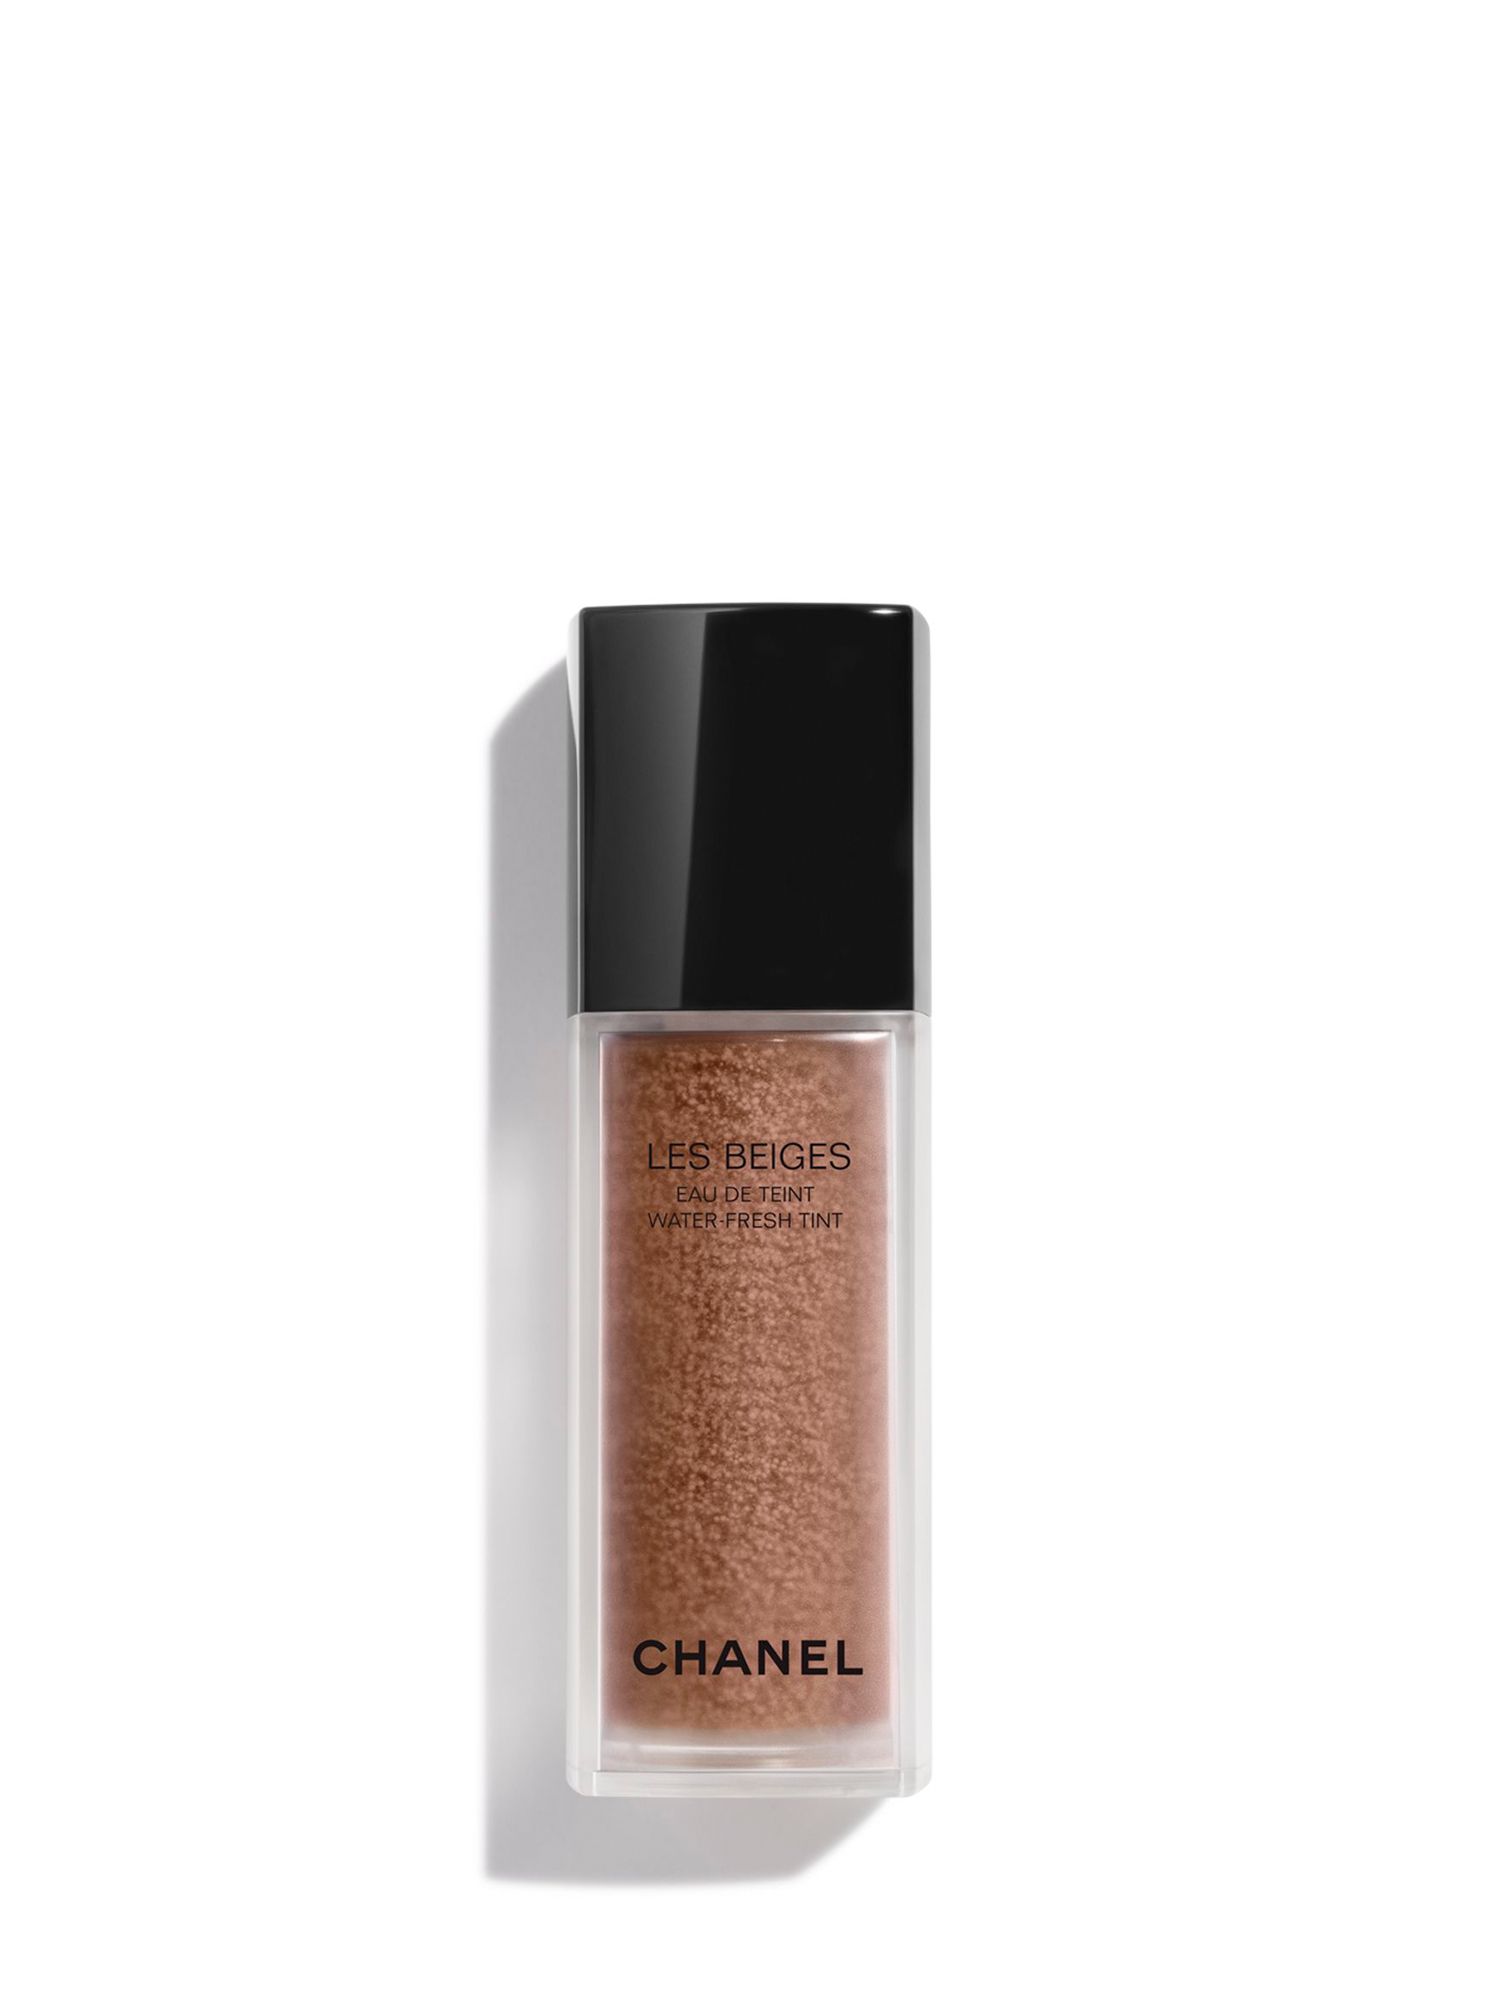 CHANEL Les Beiges Water-Fresh Tint Travel Size, Deep Plus at John